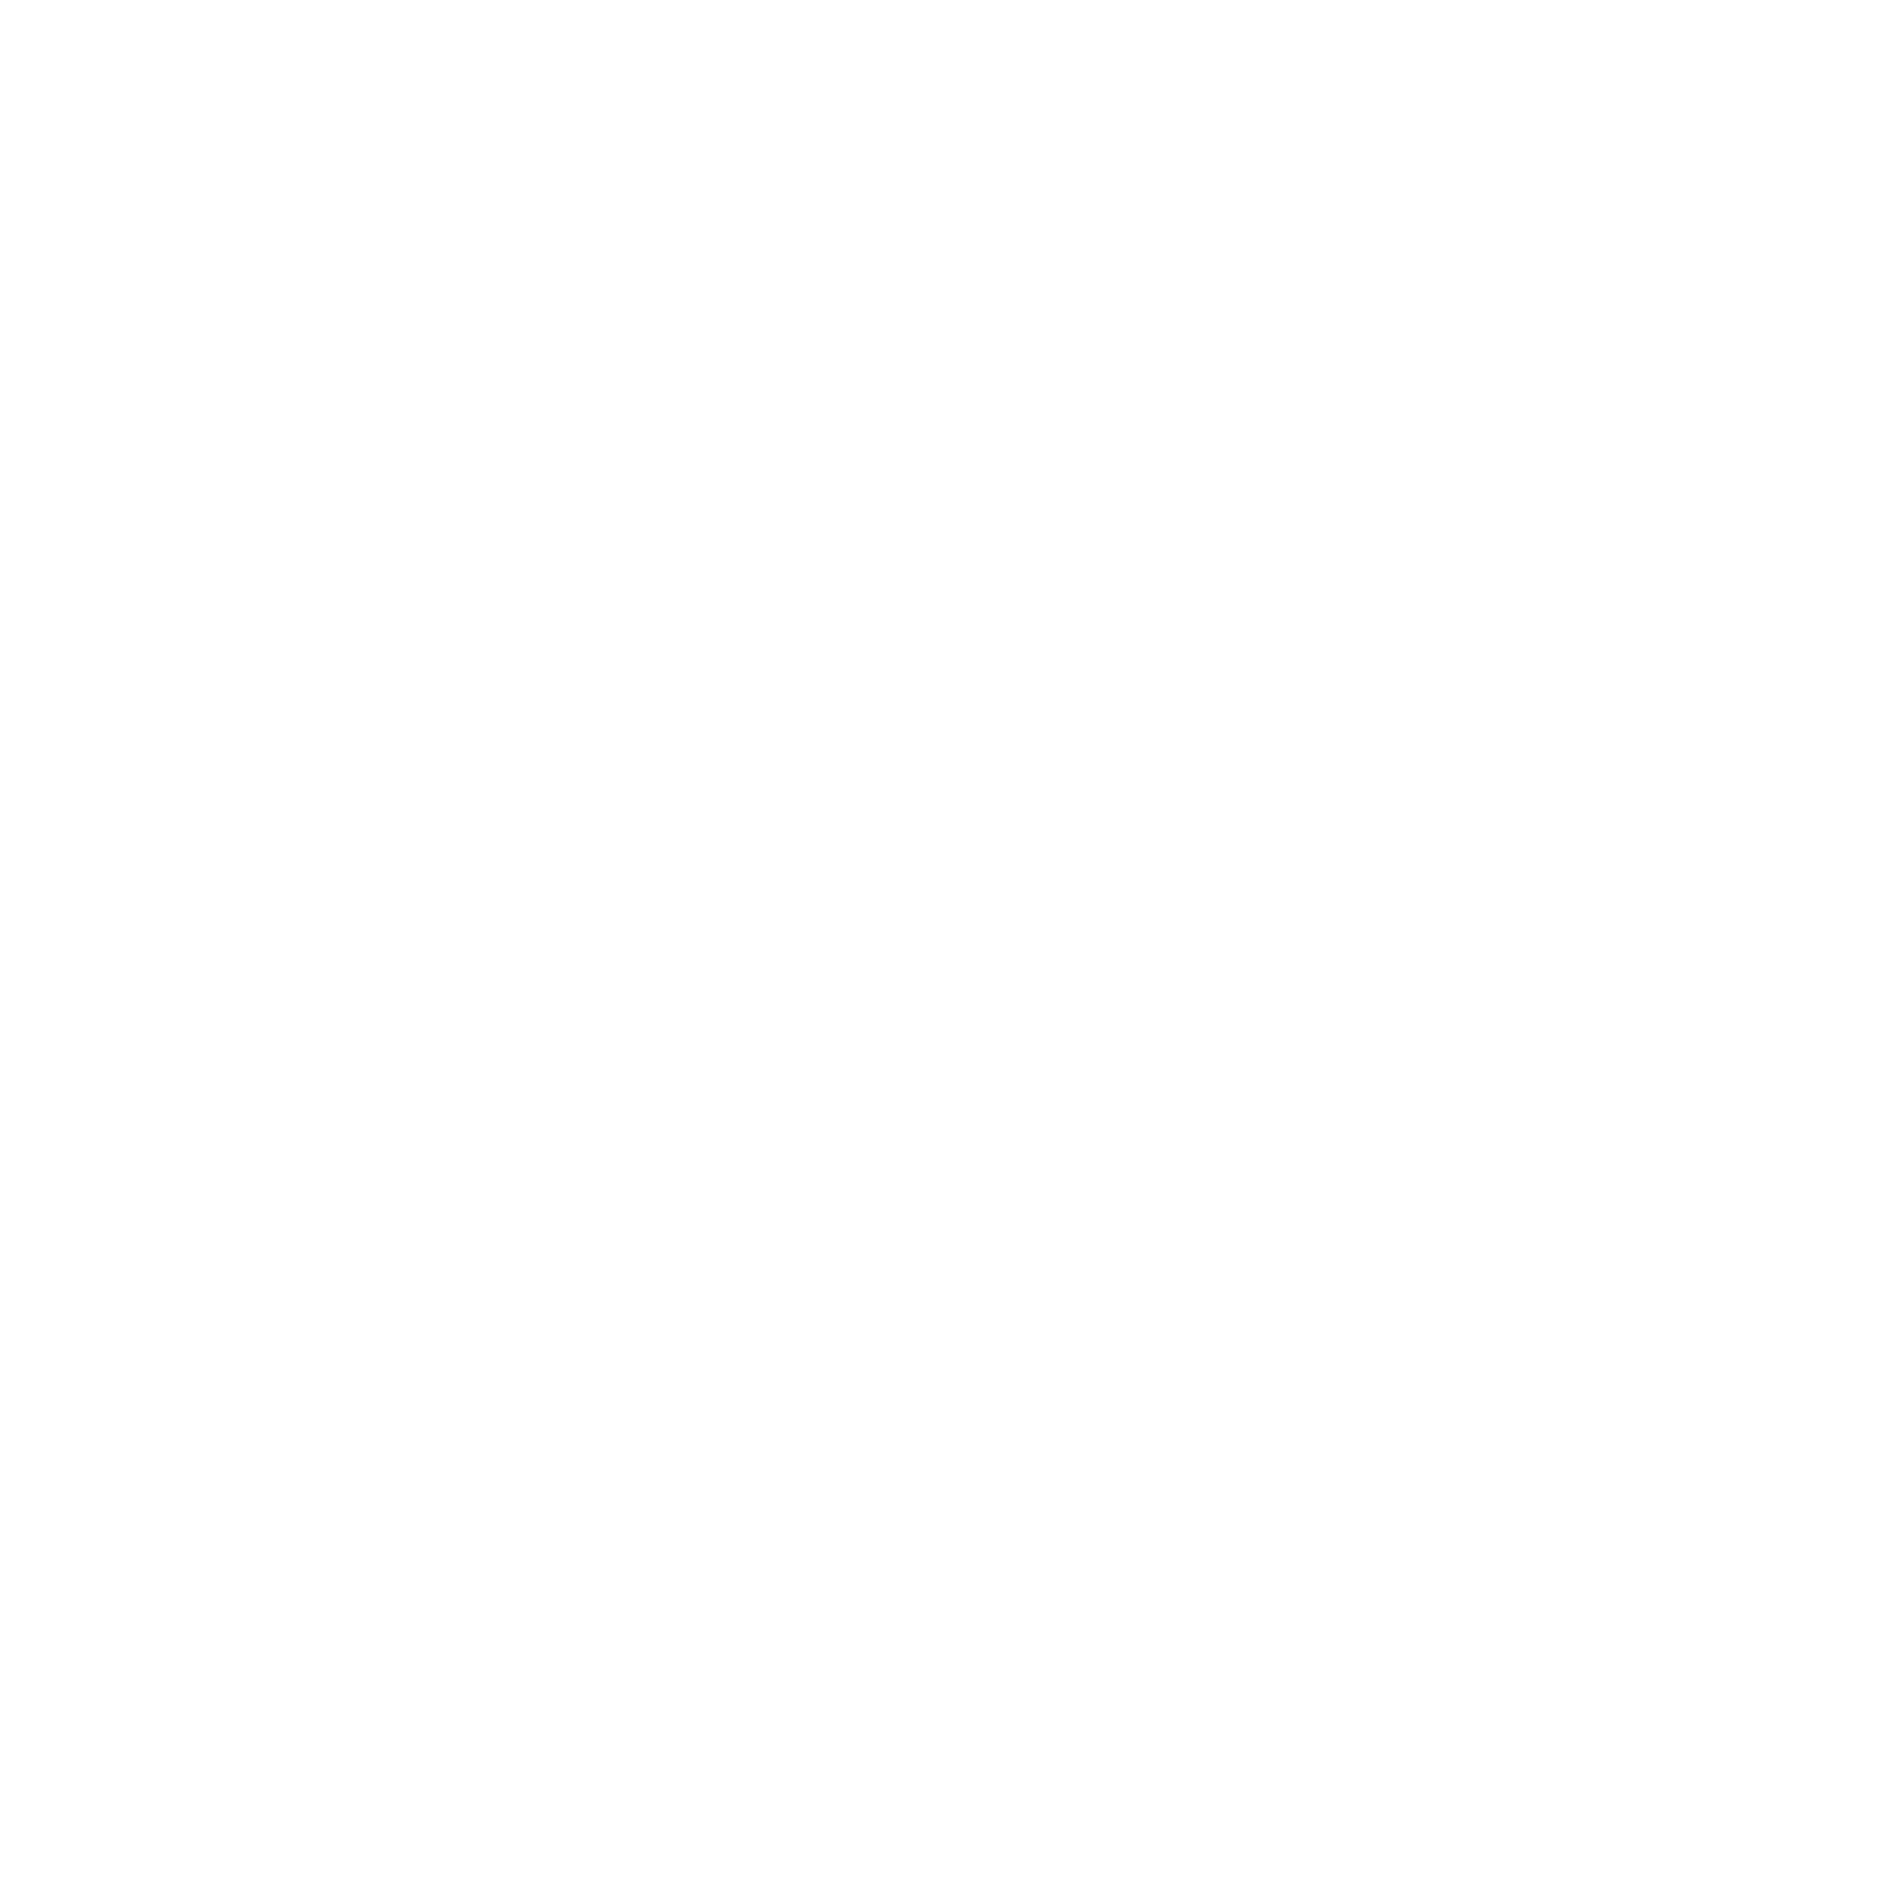 Smith & Wesson logo for dark backgrounds (transparent PNG)